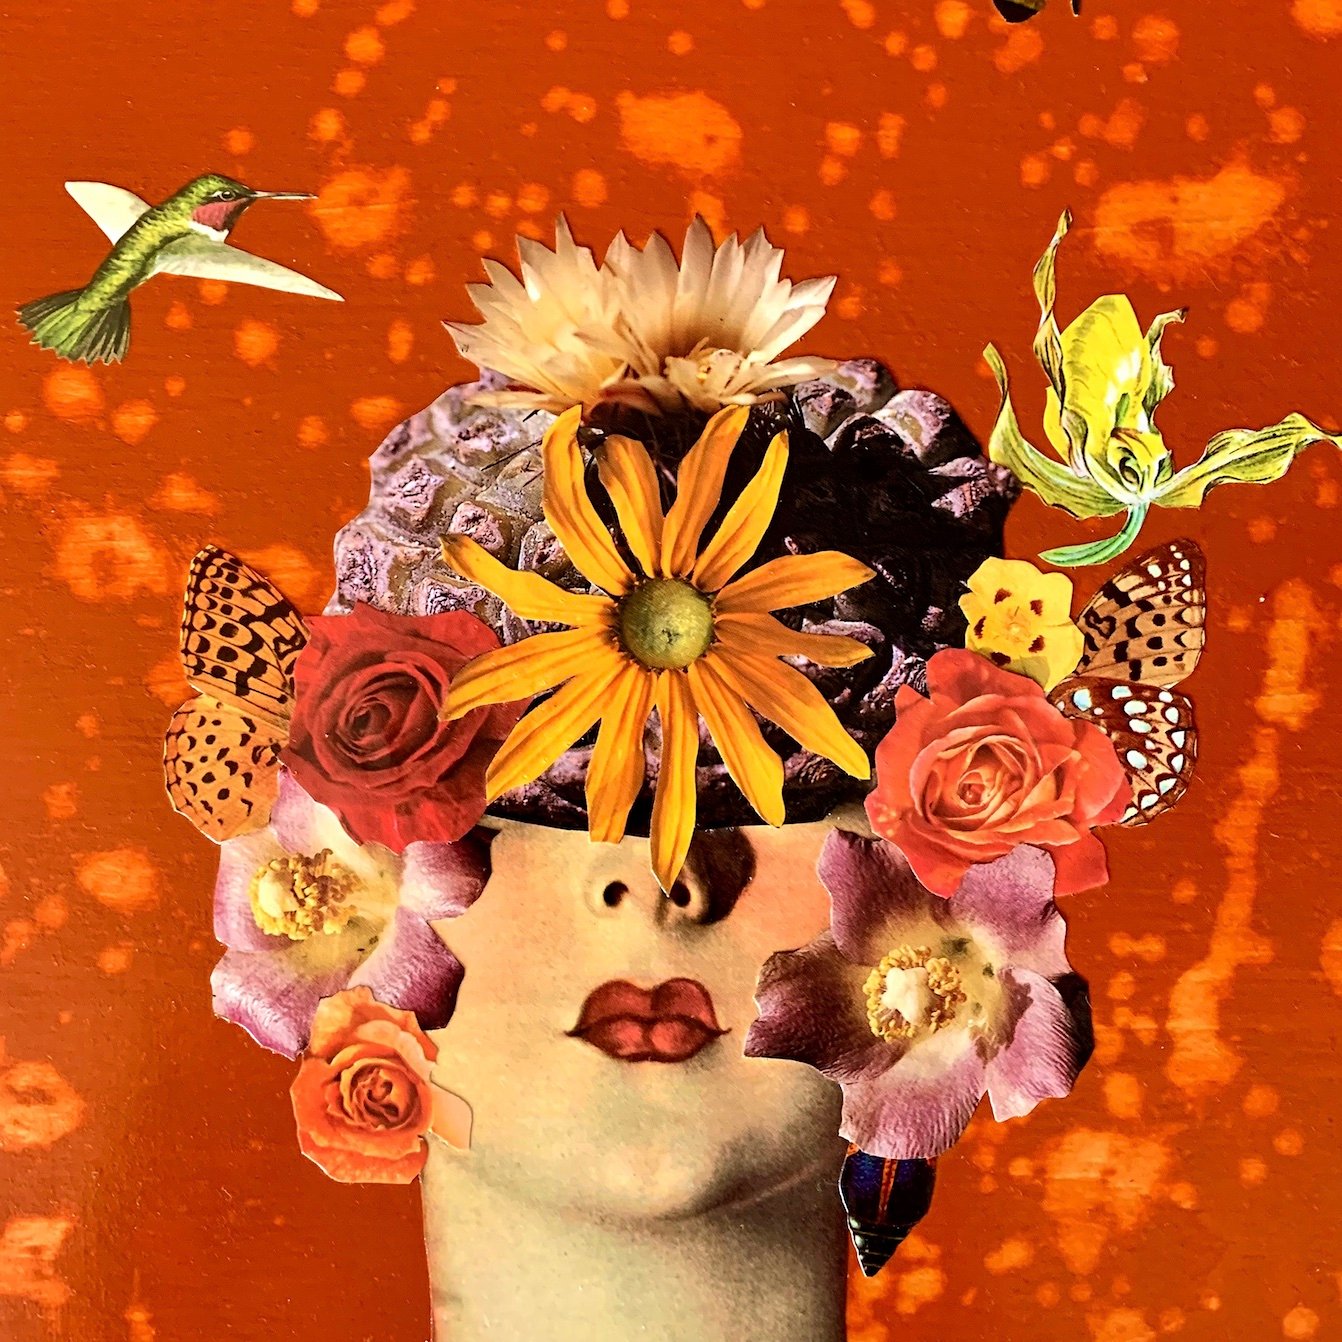 Image of She is Learning to Be Quieter, Kinder, and More Forgiving - Orignial Mixed Media Collage 